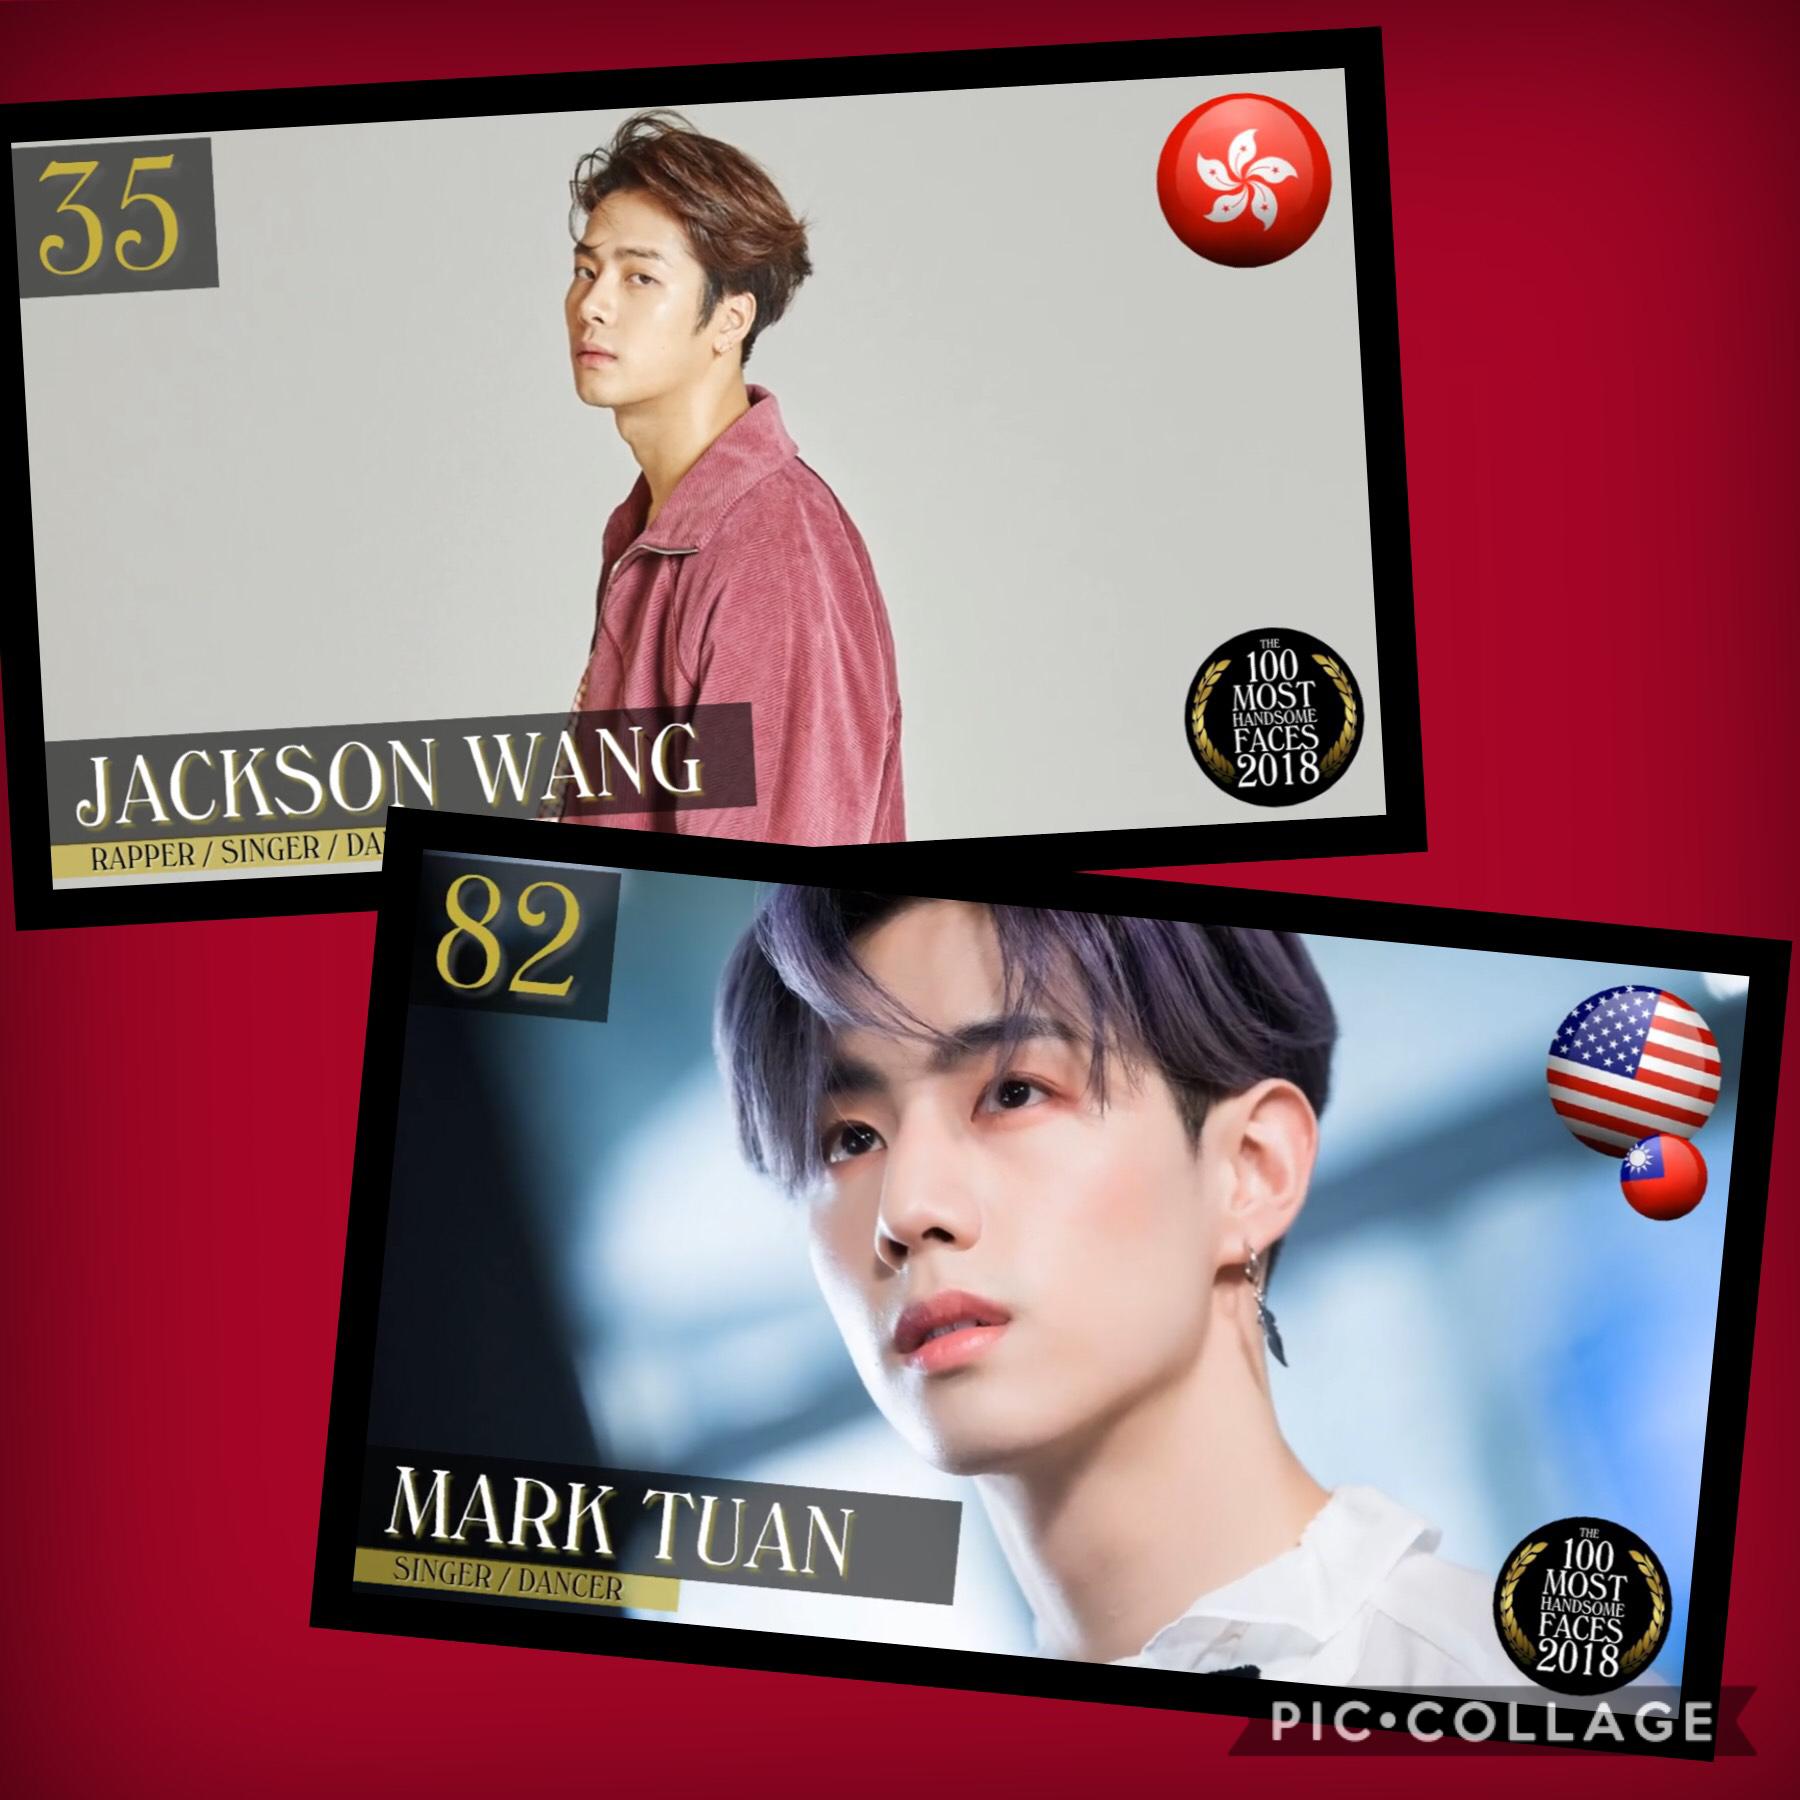 Jackson and mark ranked in the top 100 beautiful men. I am so happy I found this